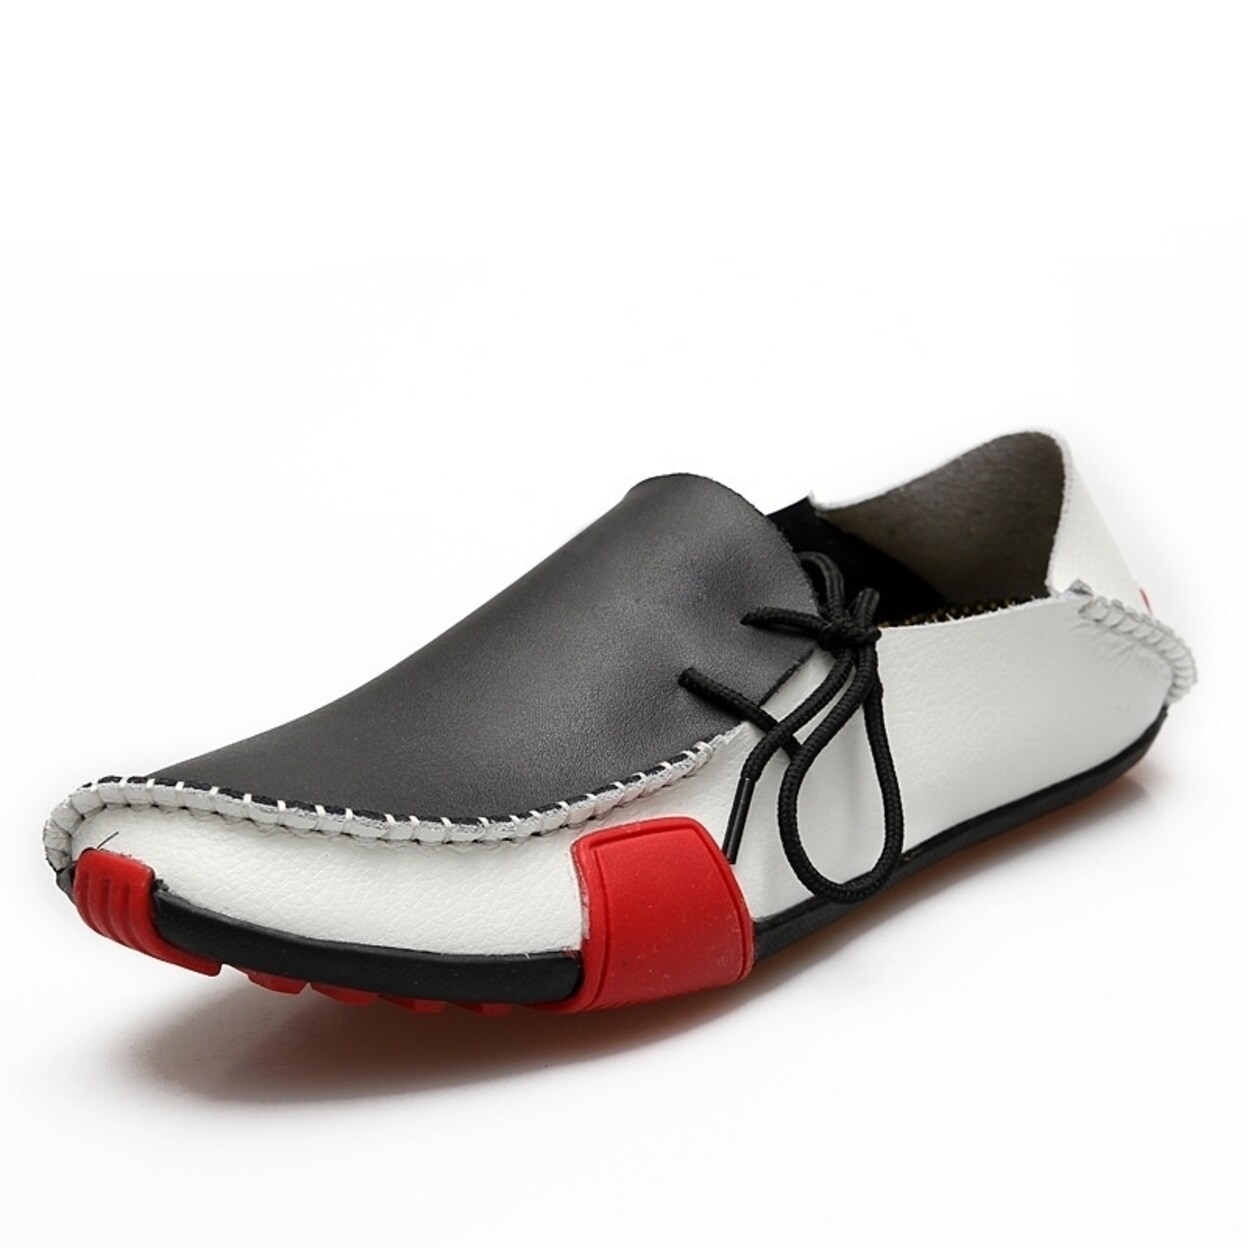 mens casual leather loafers